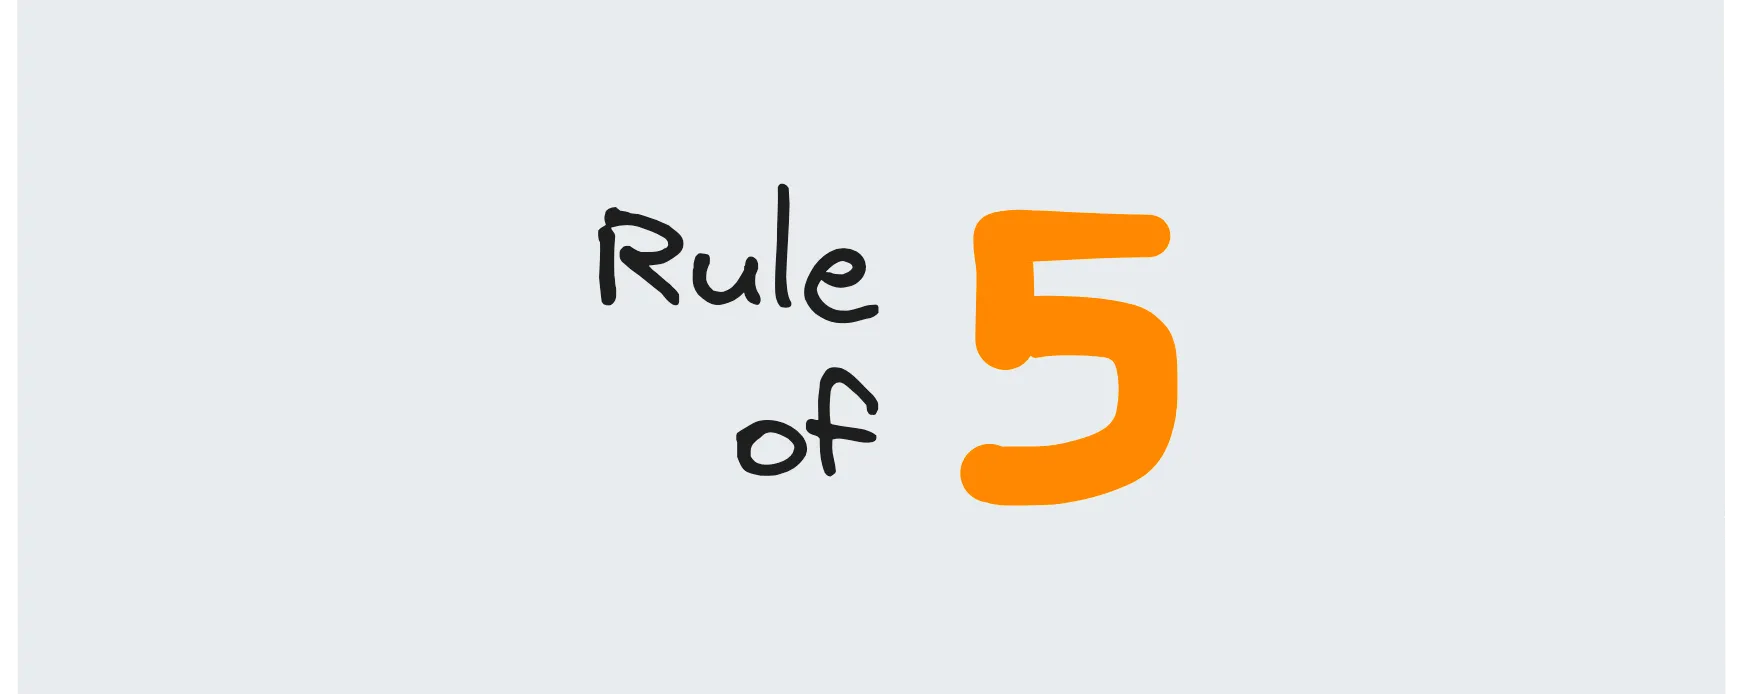 The rule of five banner image